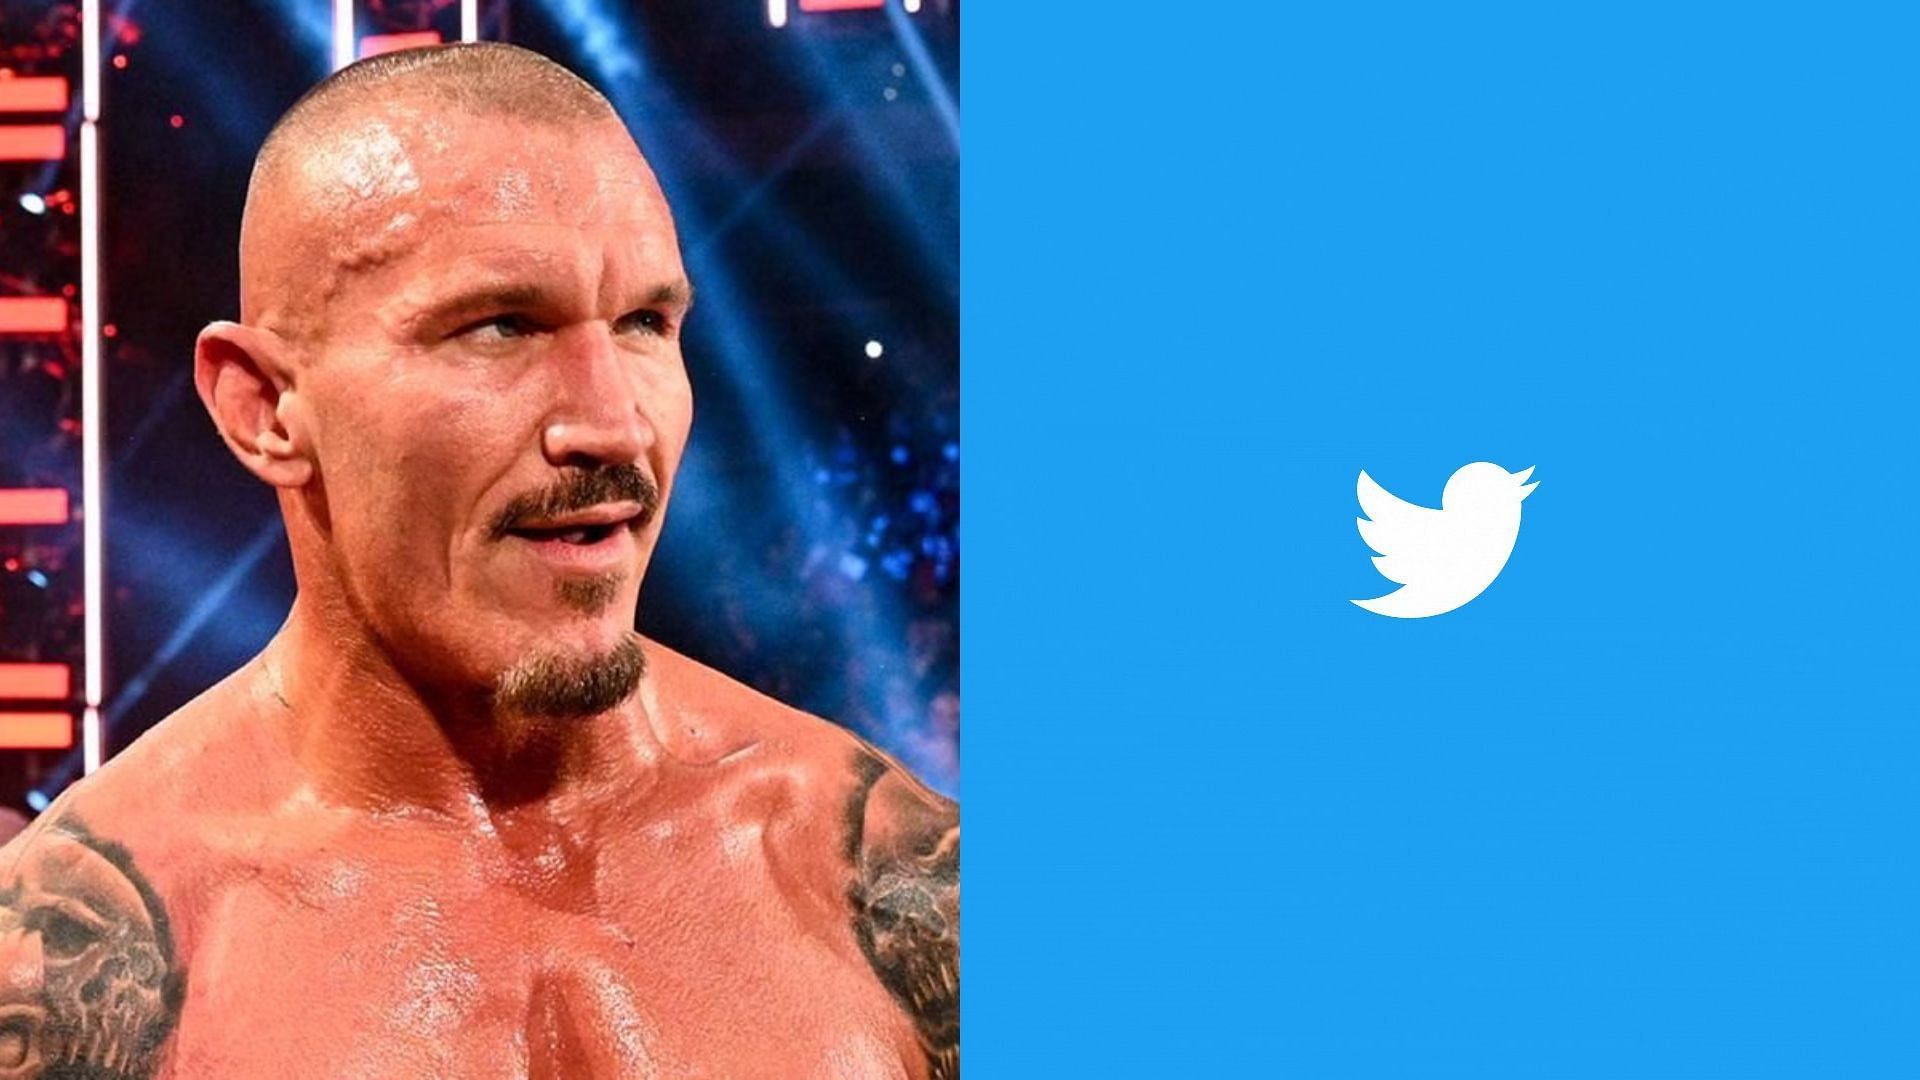 Some WWE Superstars have been caught up in Twitter controversies